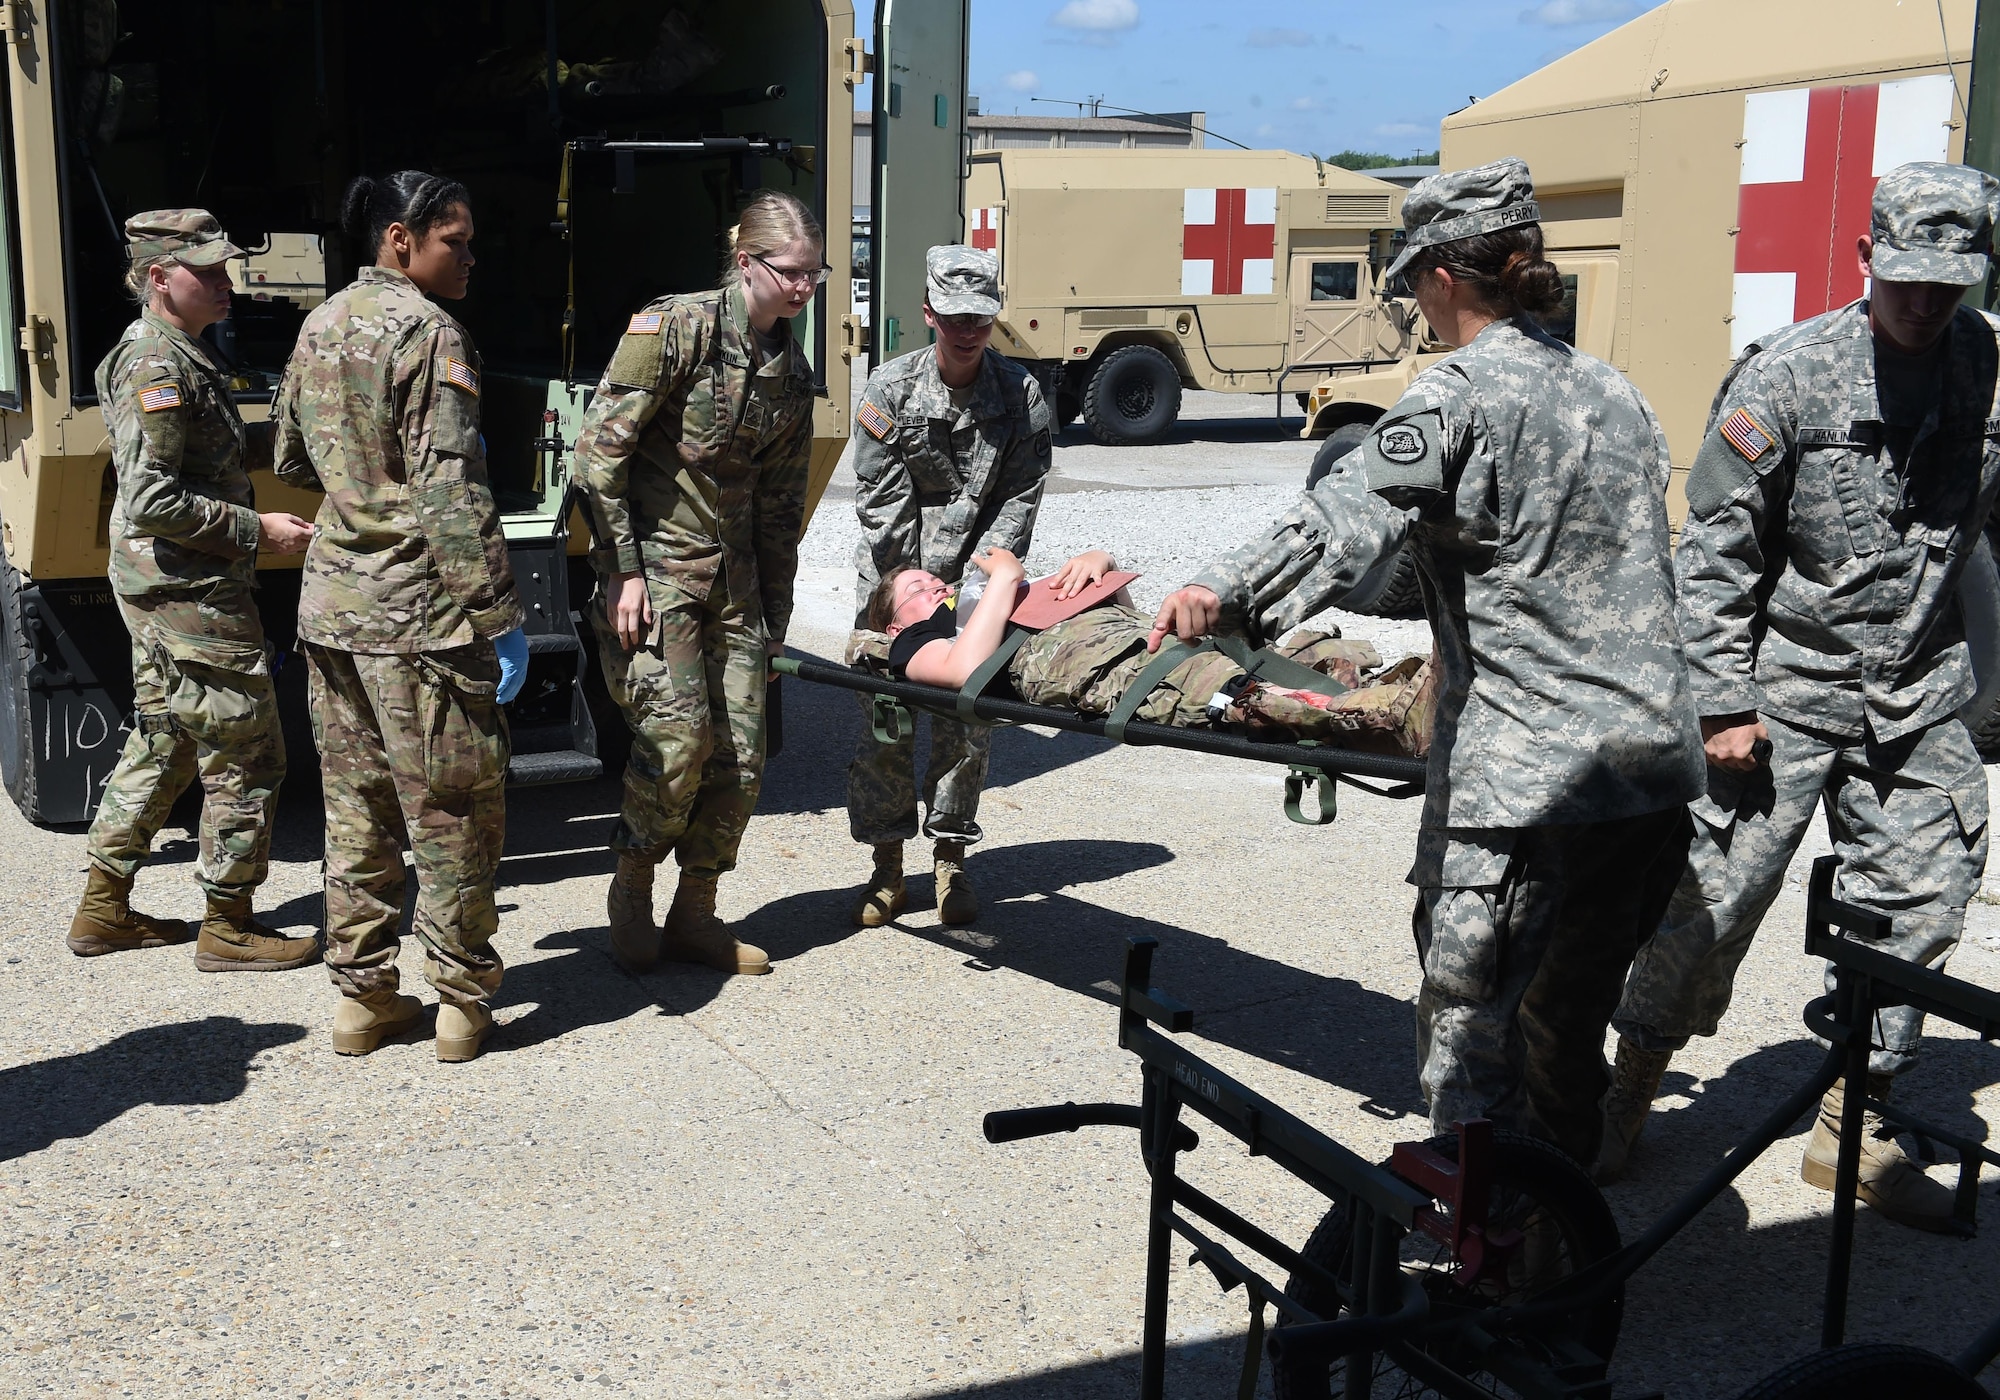 Soldiers from the 209th and 134th Medical Companies practice transfering a patient from an ambulance into the Sustainment Training Center, July 24, 2017, at Camp Dodge in Johnston, Iowa. Medics from the Iowa Air and Army National Guard trained with medics from the United Kingdom and Kosovo. (U.S. Air National Guard photo by Staff Sgt. Michael J. Kelly)